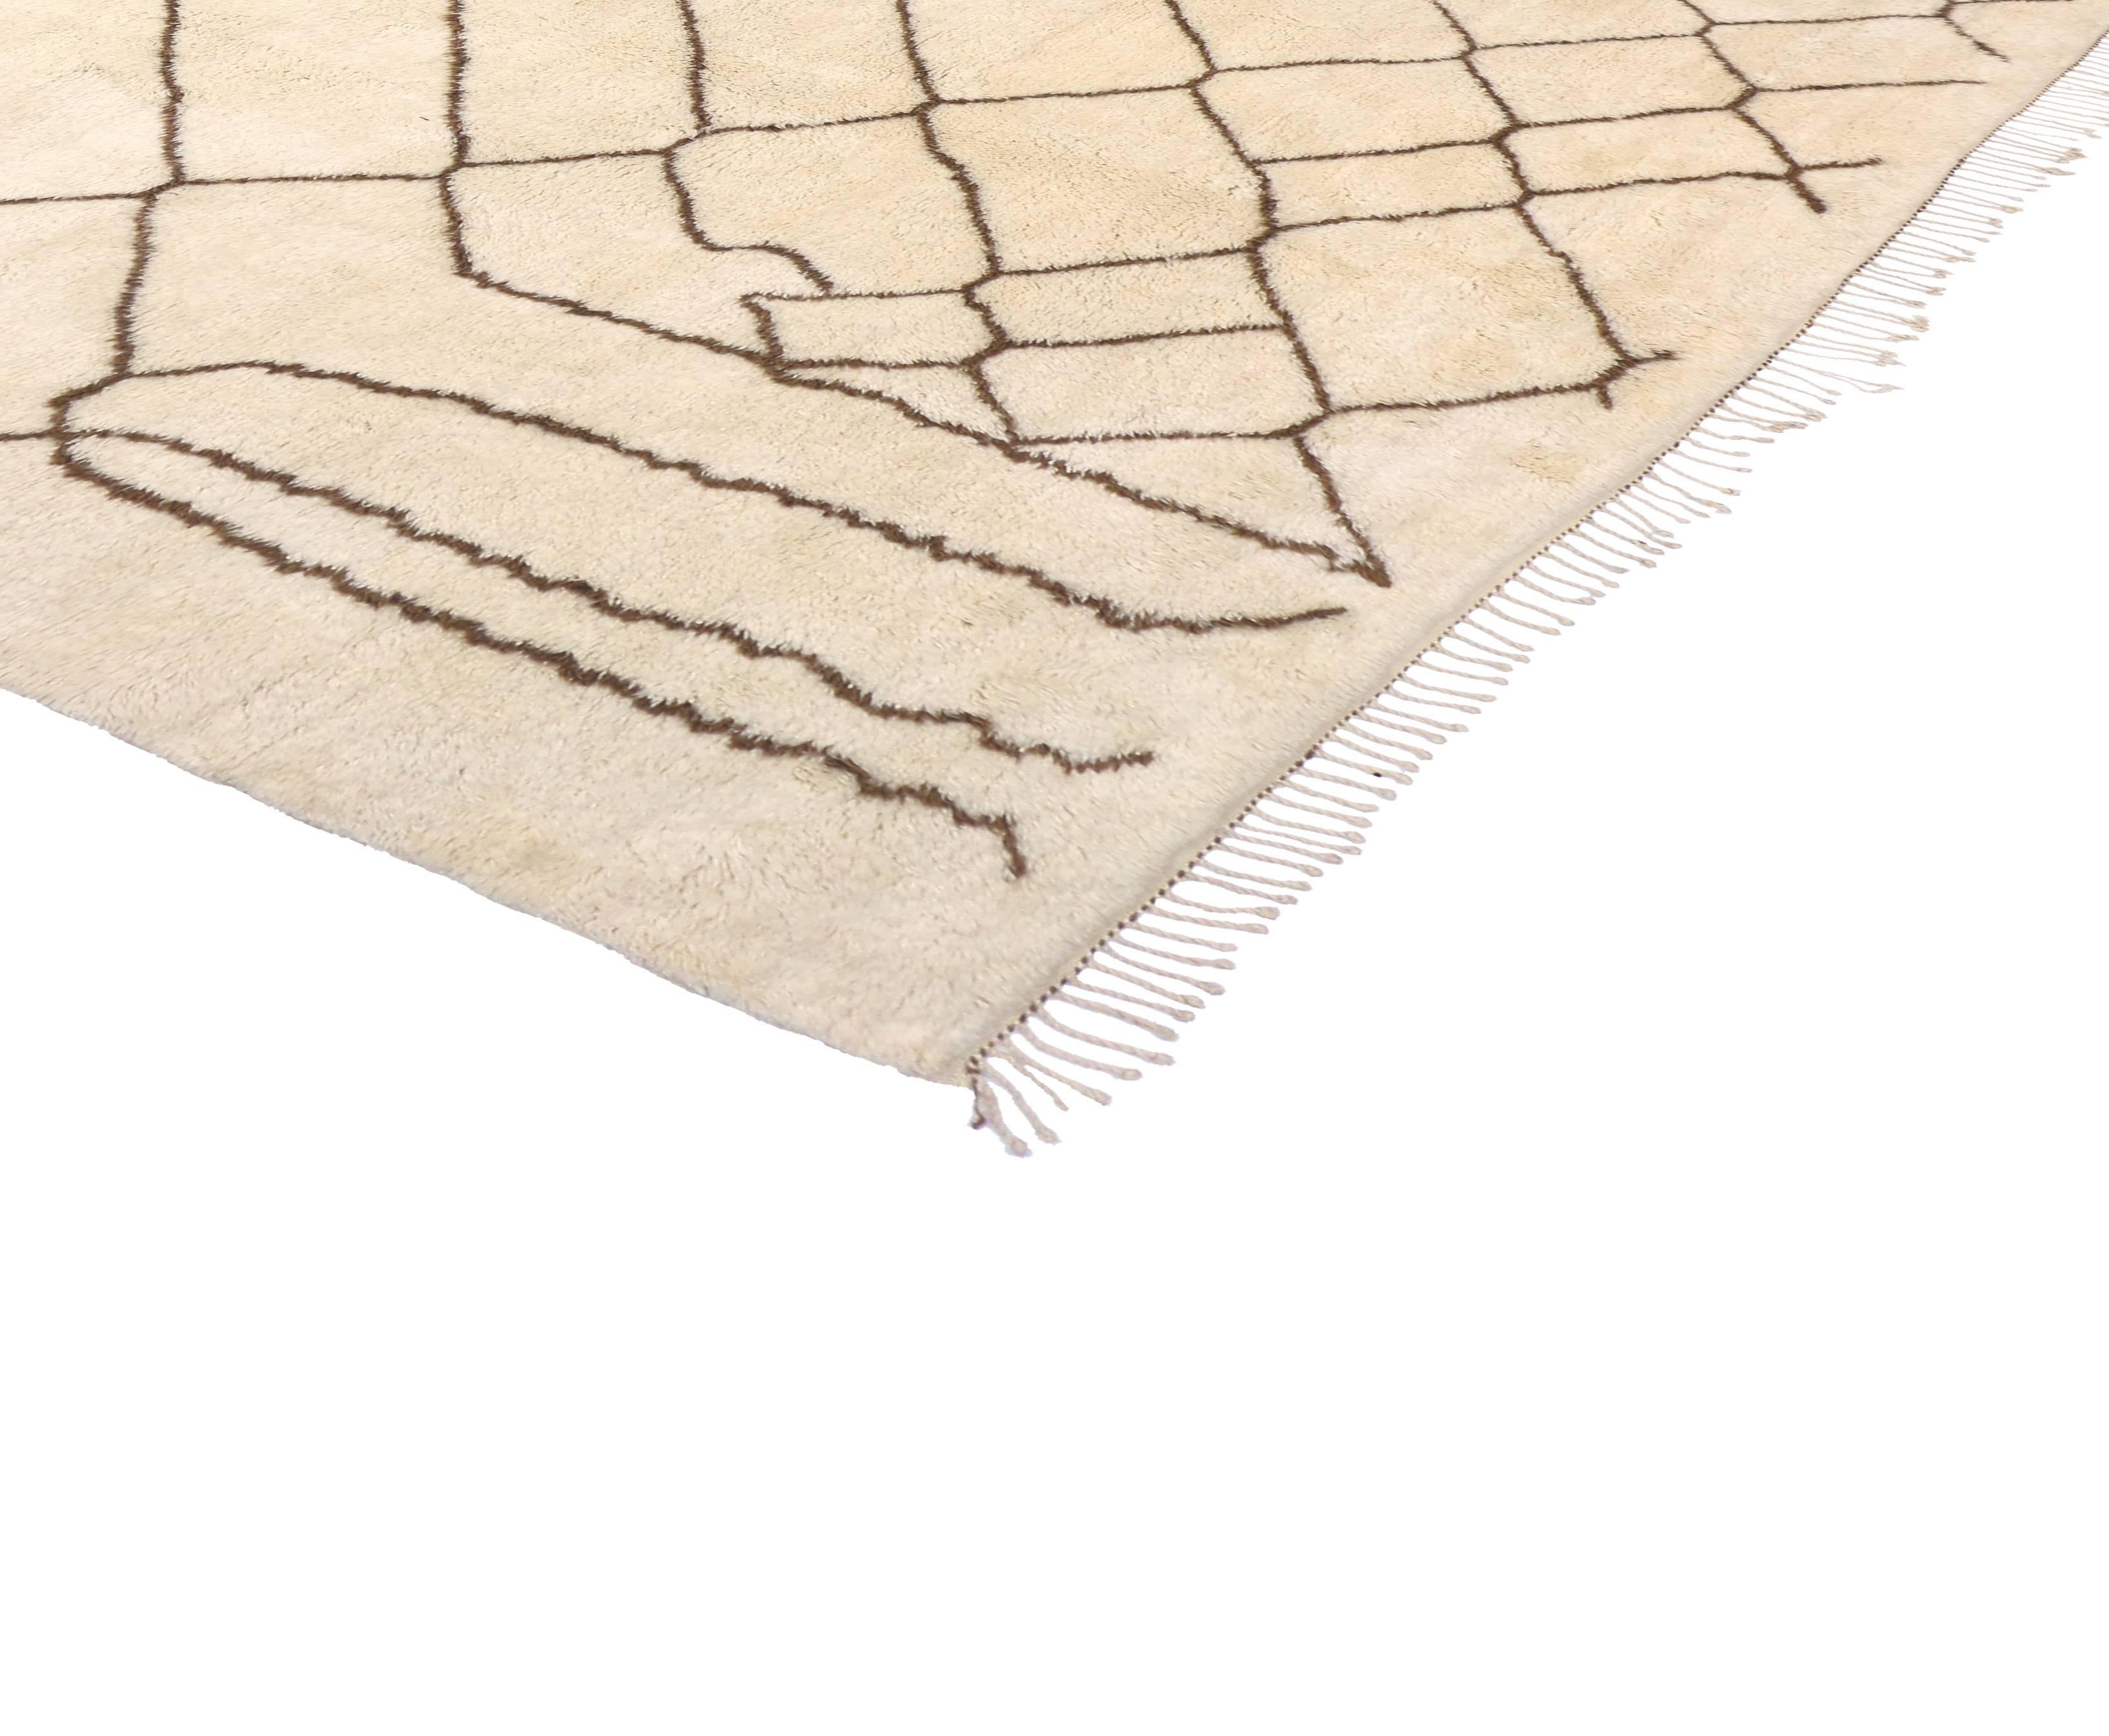 This Moroccan area rug harmonizes disparate elements, brings soothing serenity while adding texture and depth to your space. This is a wonderful example of a Moroccan rug, woven with a clean and simple, yet sophisticated composition. The off white,